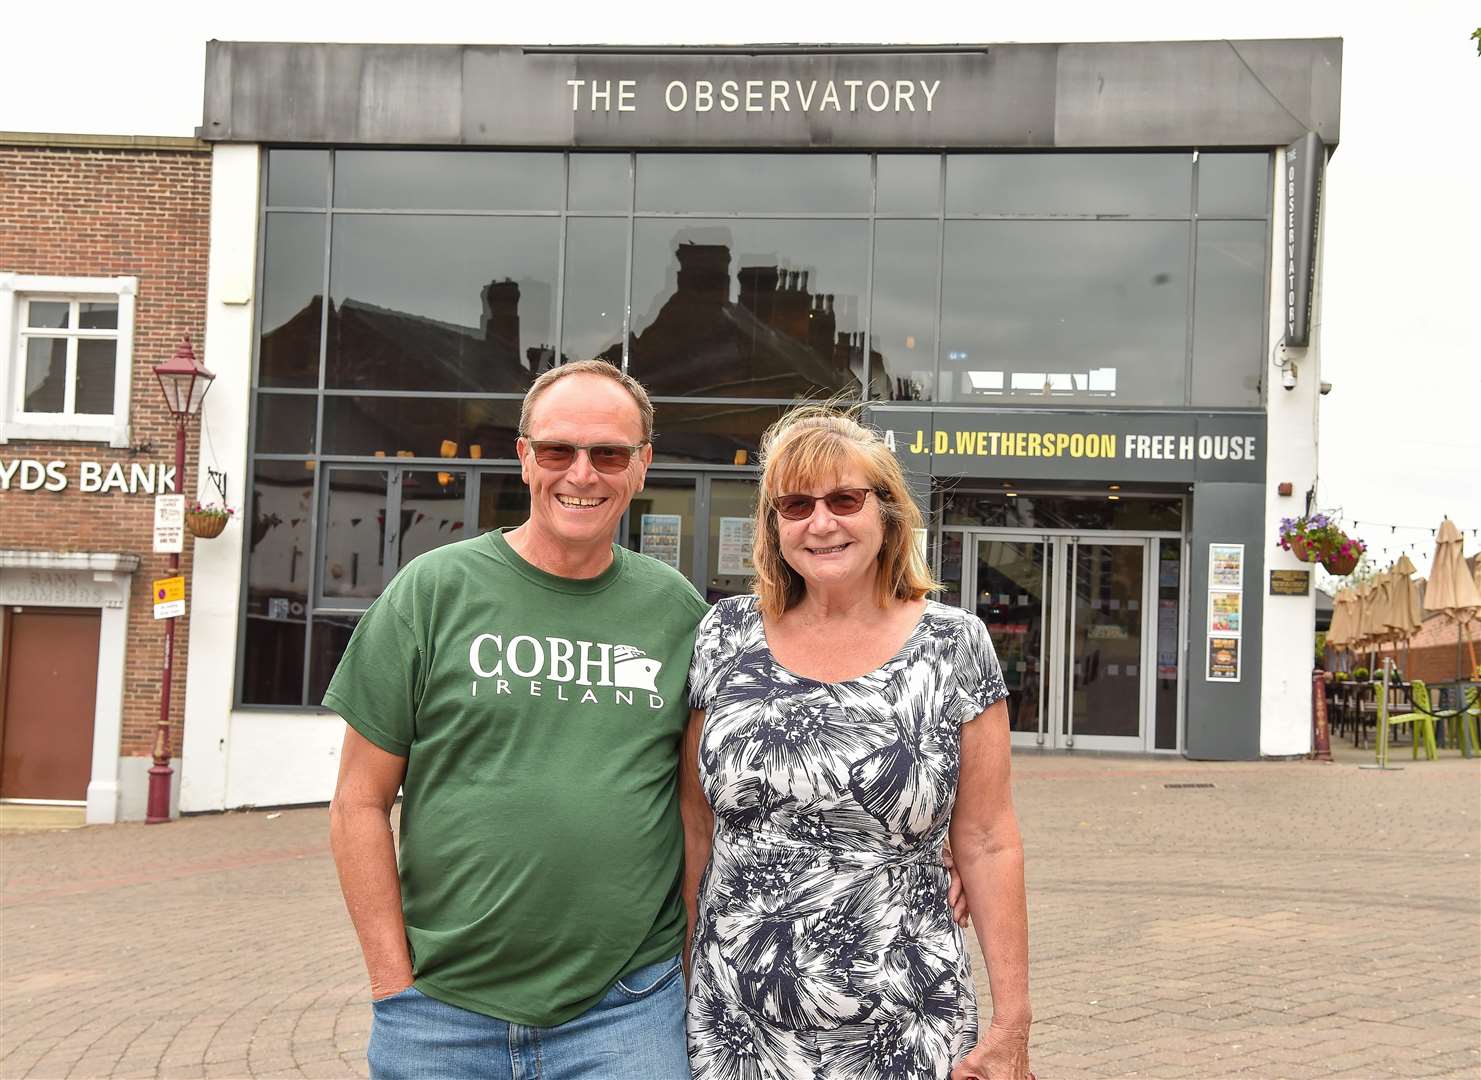 David Bingham and partner Una Cooper started their epic Spoons journey at their local branch The Observatory in Ilkeston, Derbyshire. Picture: SWNS